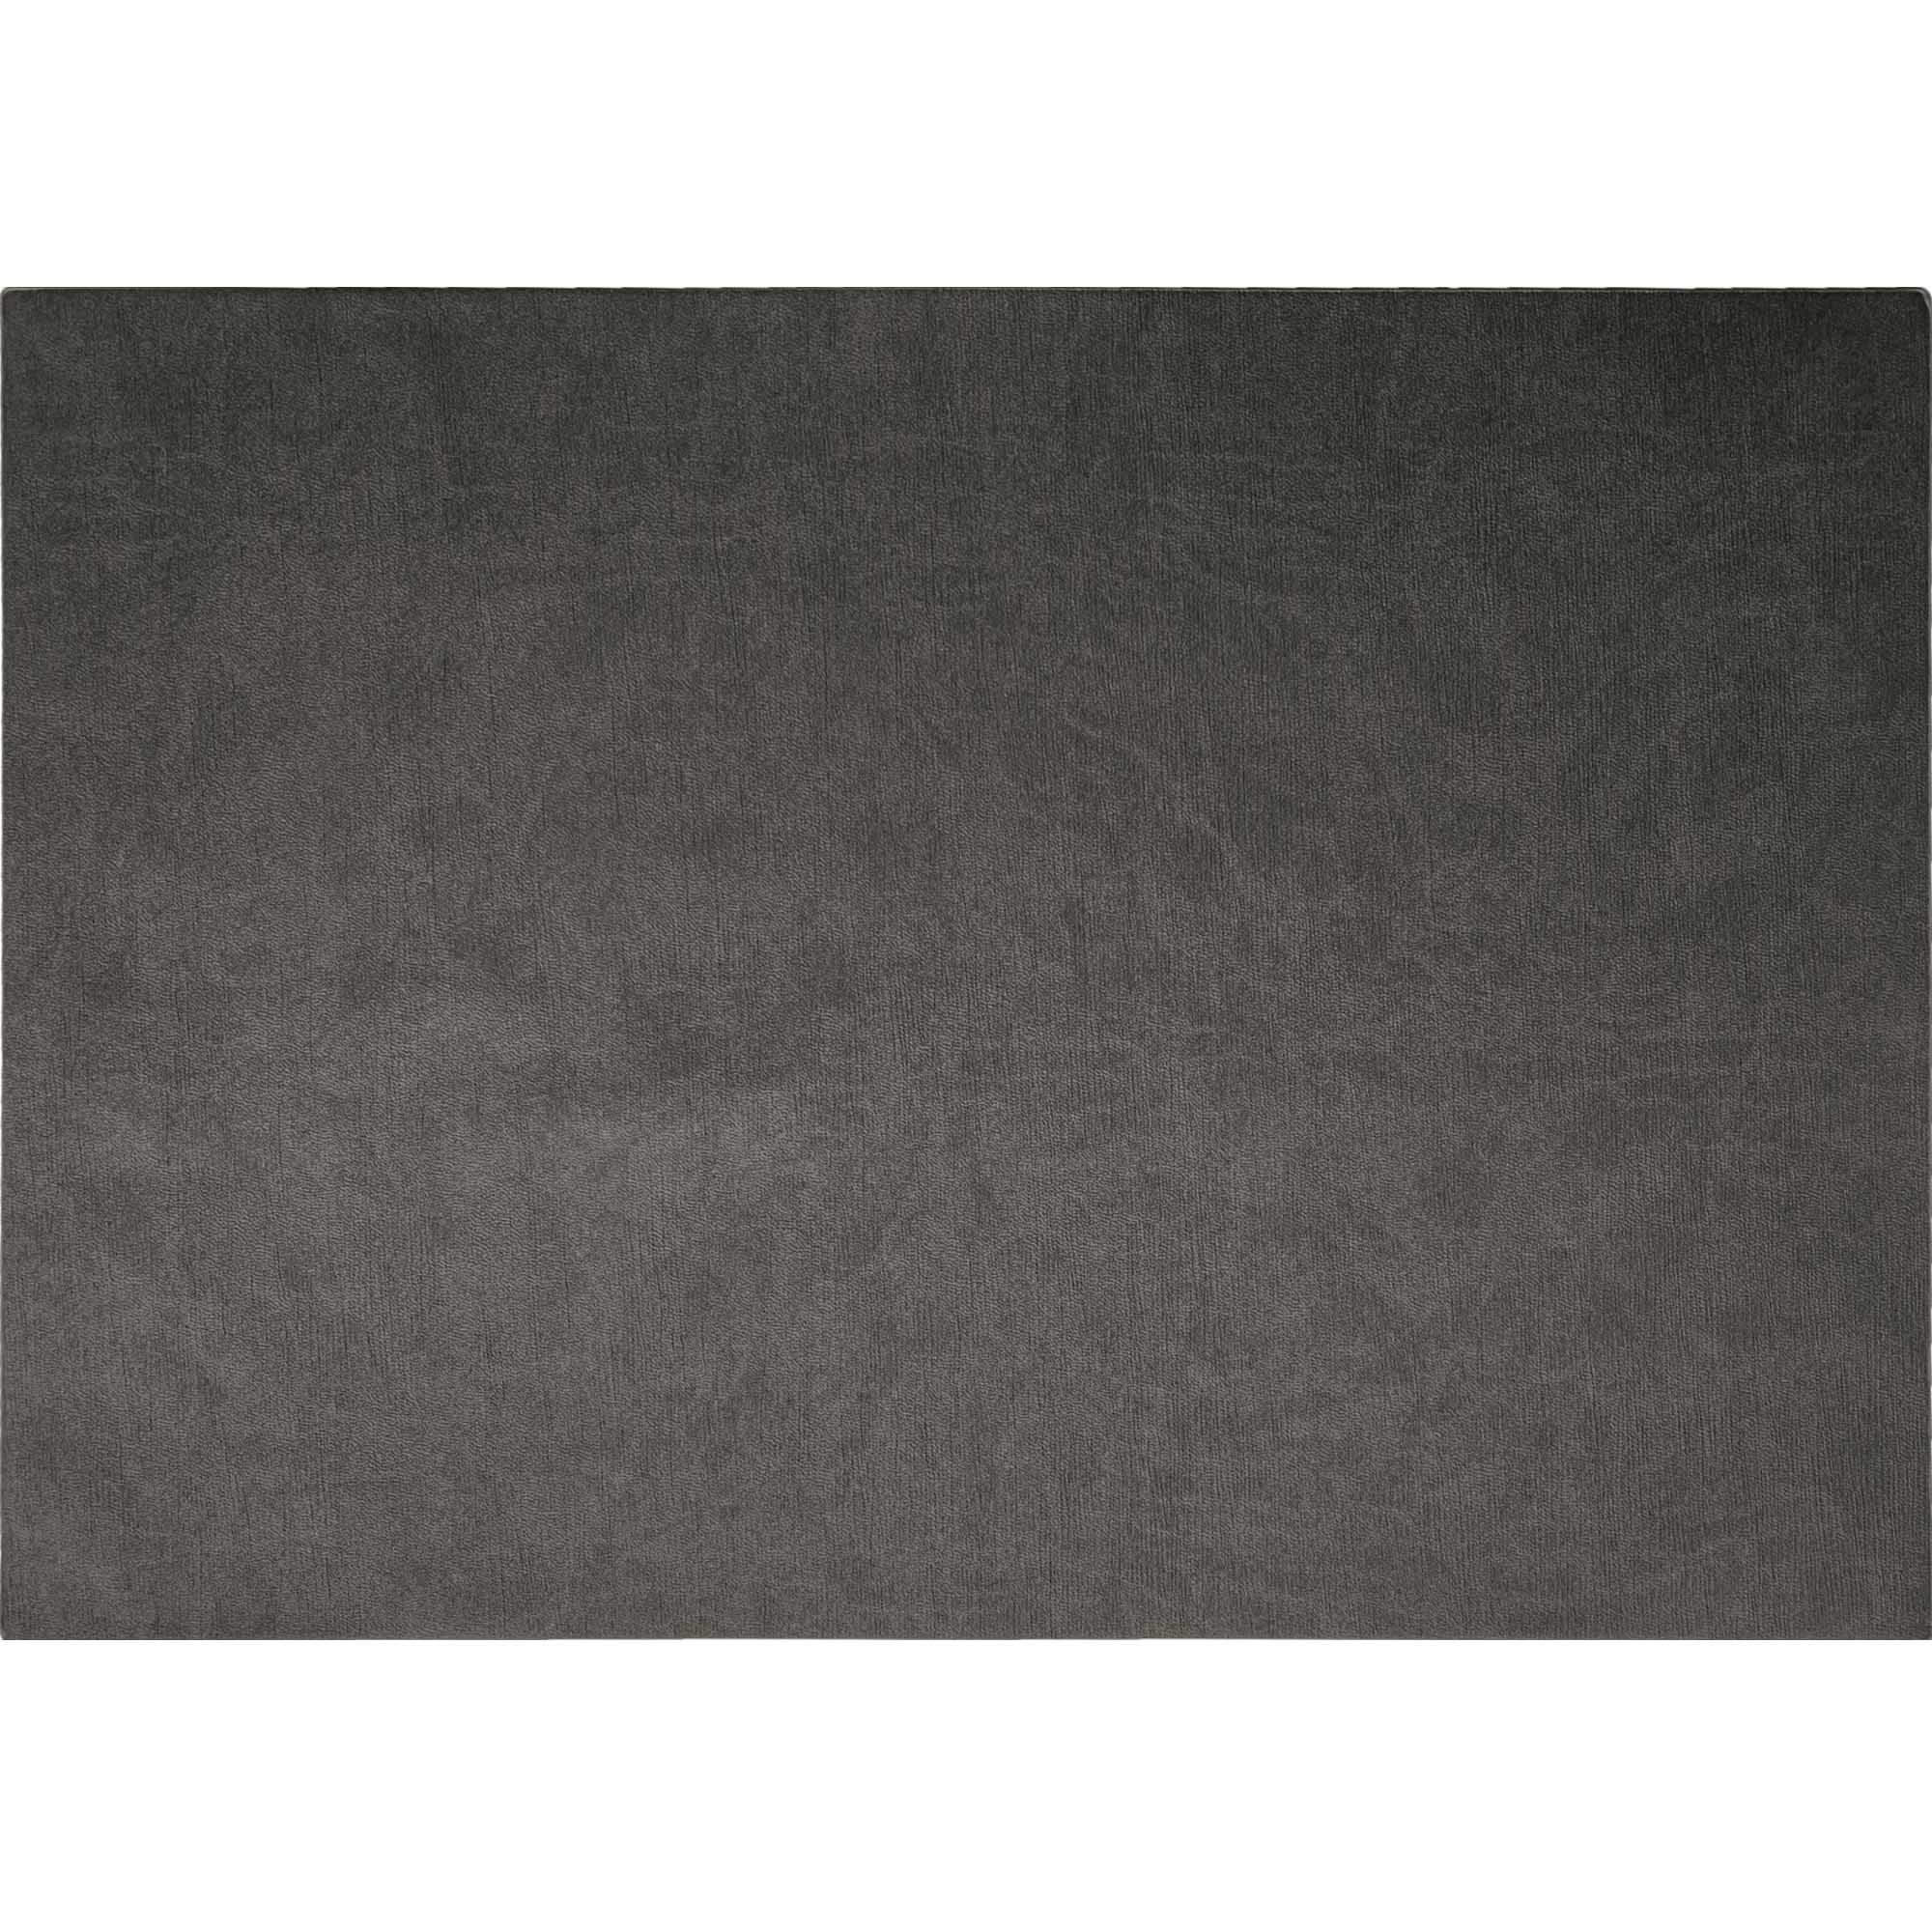 Heavy Grey Suede Look Placemat 17x12in